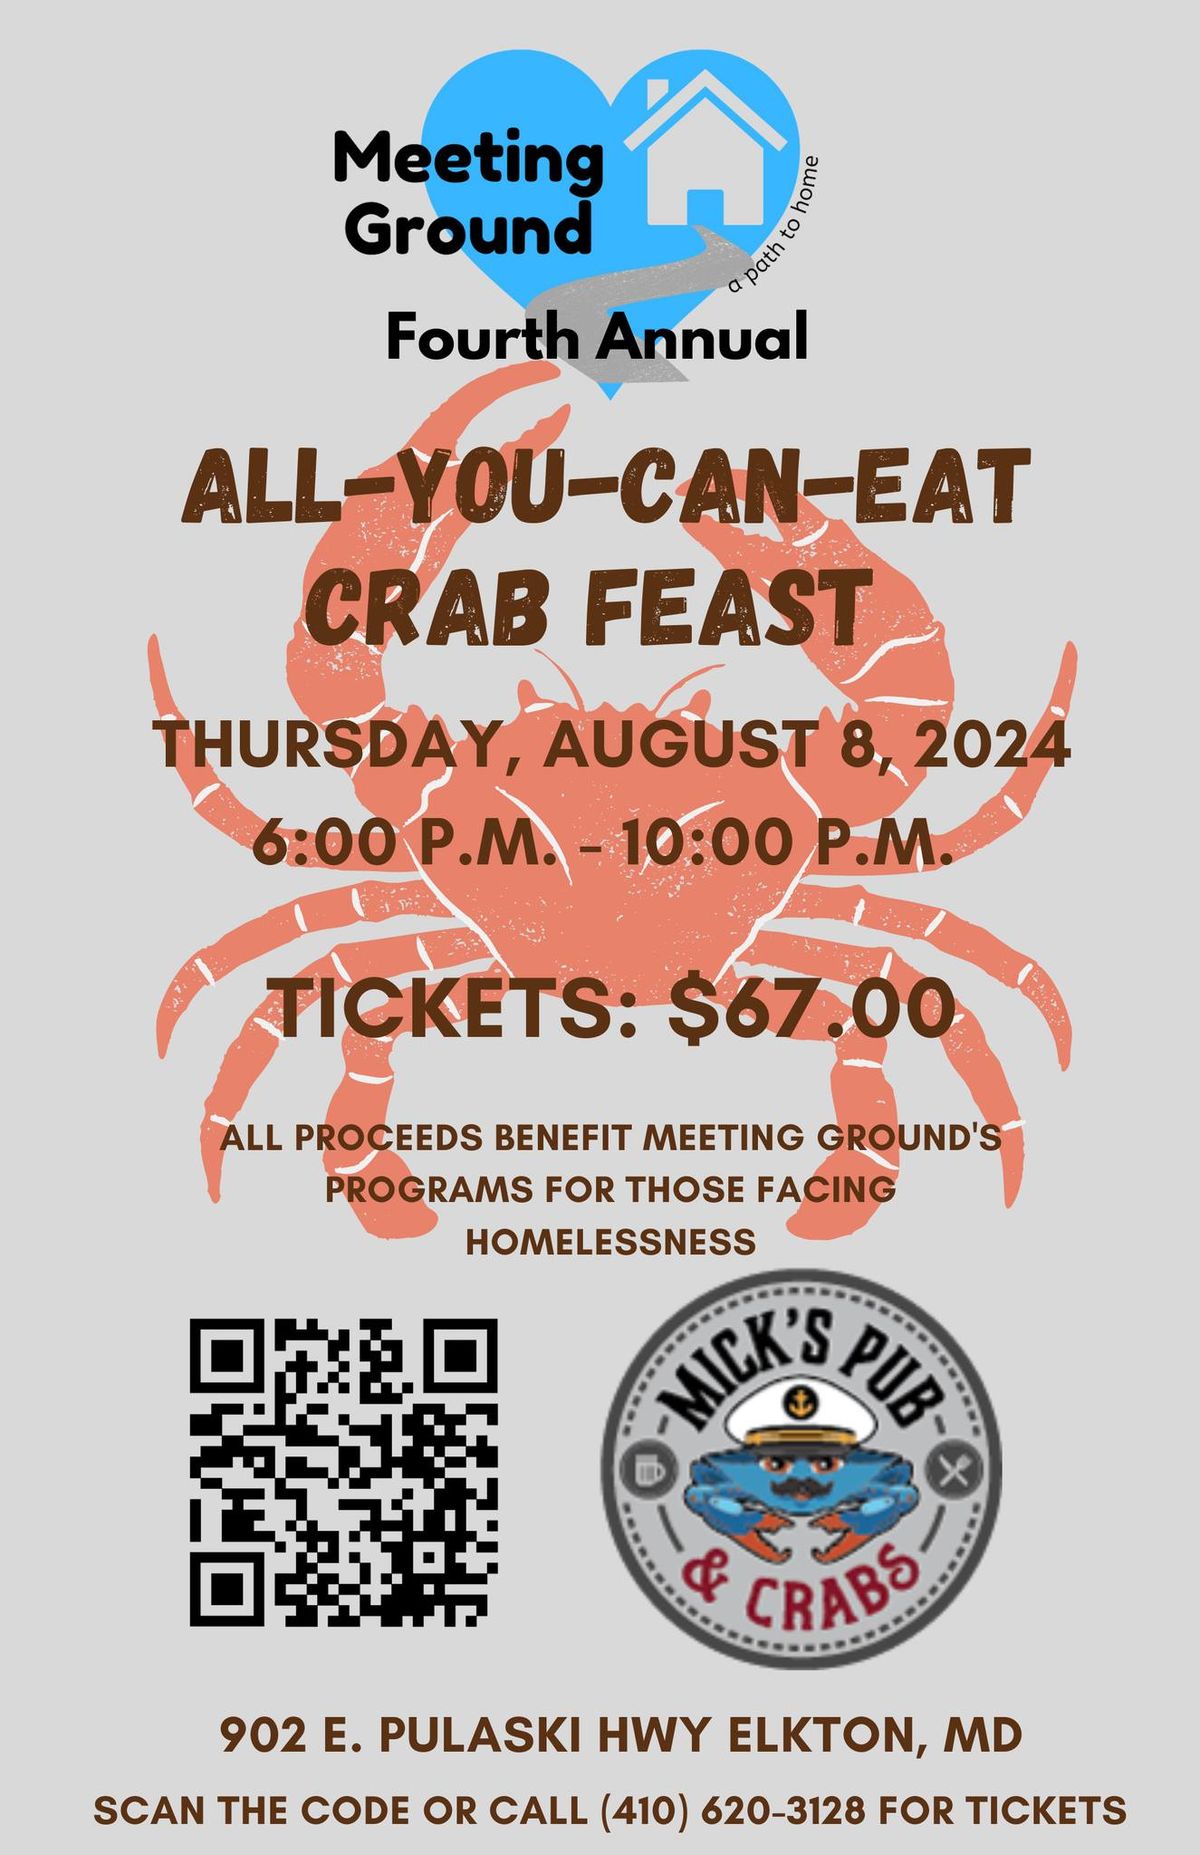 Meeting Ground's Fourth Annual All-You-Can-Eat Crab Fundraiser